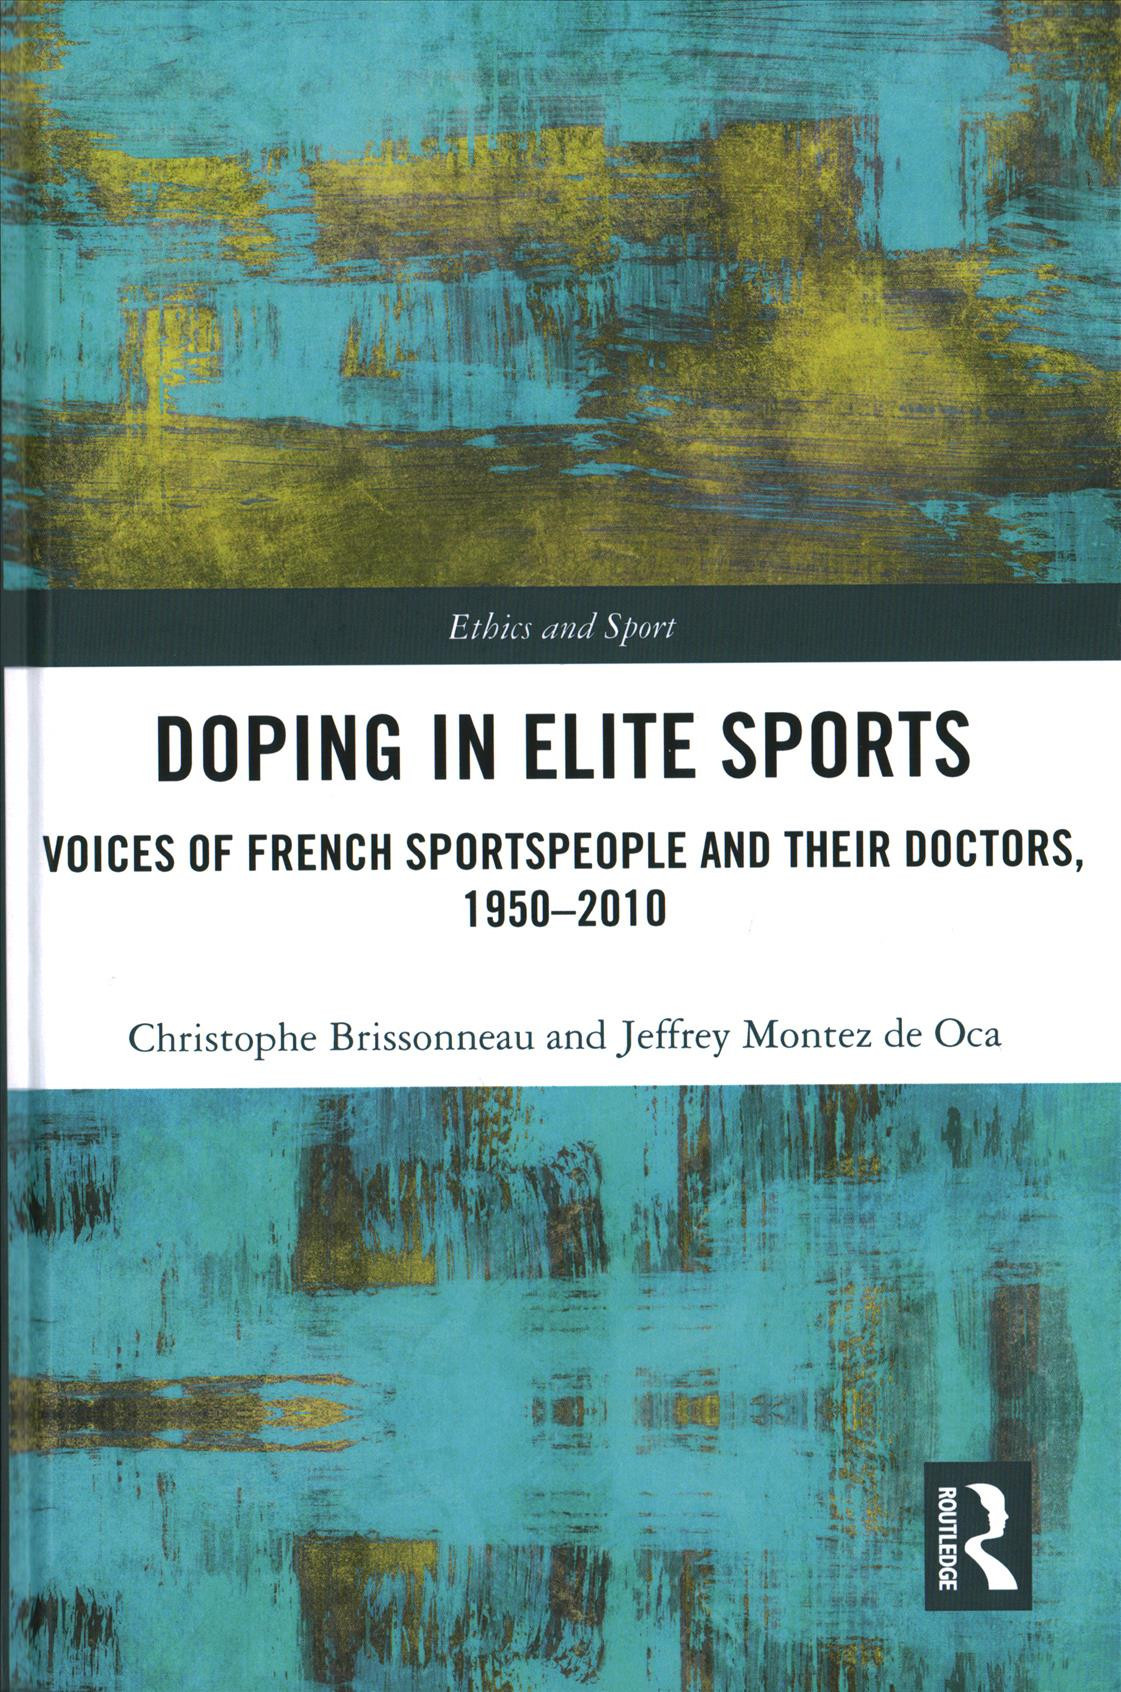 A newly study published in the book Doping in Elite Sports - Voices of French sportspeople and Their Doctors, 1950-2010 offers a richly researched view on how doping in elite sport has developed and operated since 1950 ©Routledge